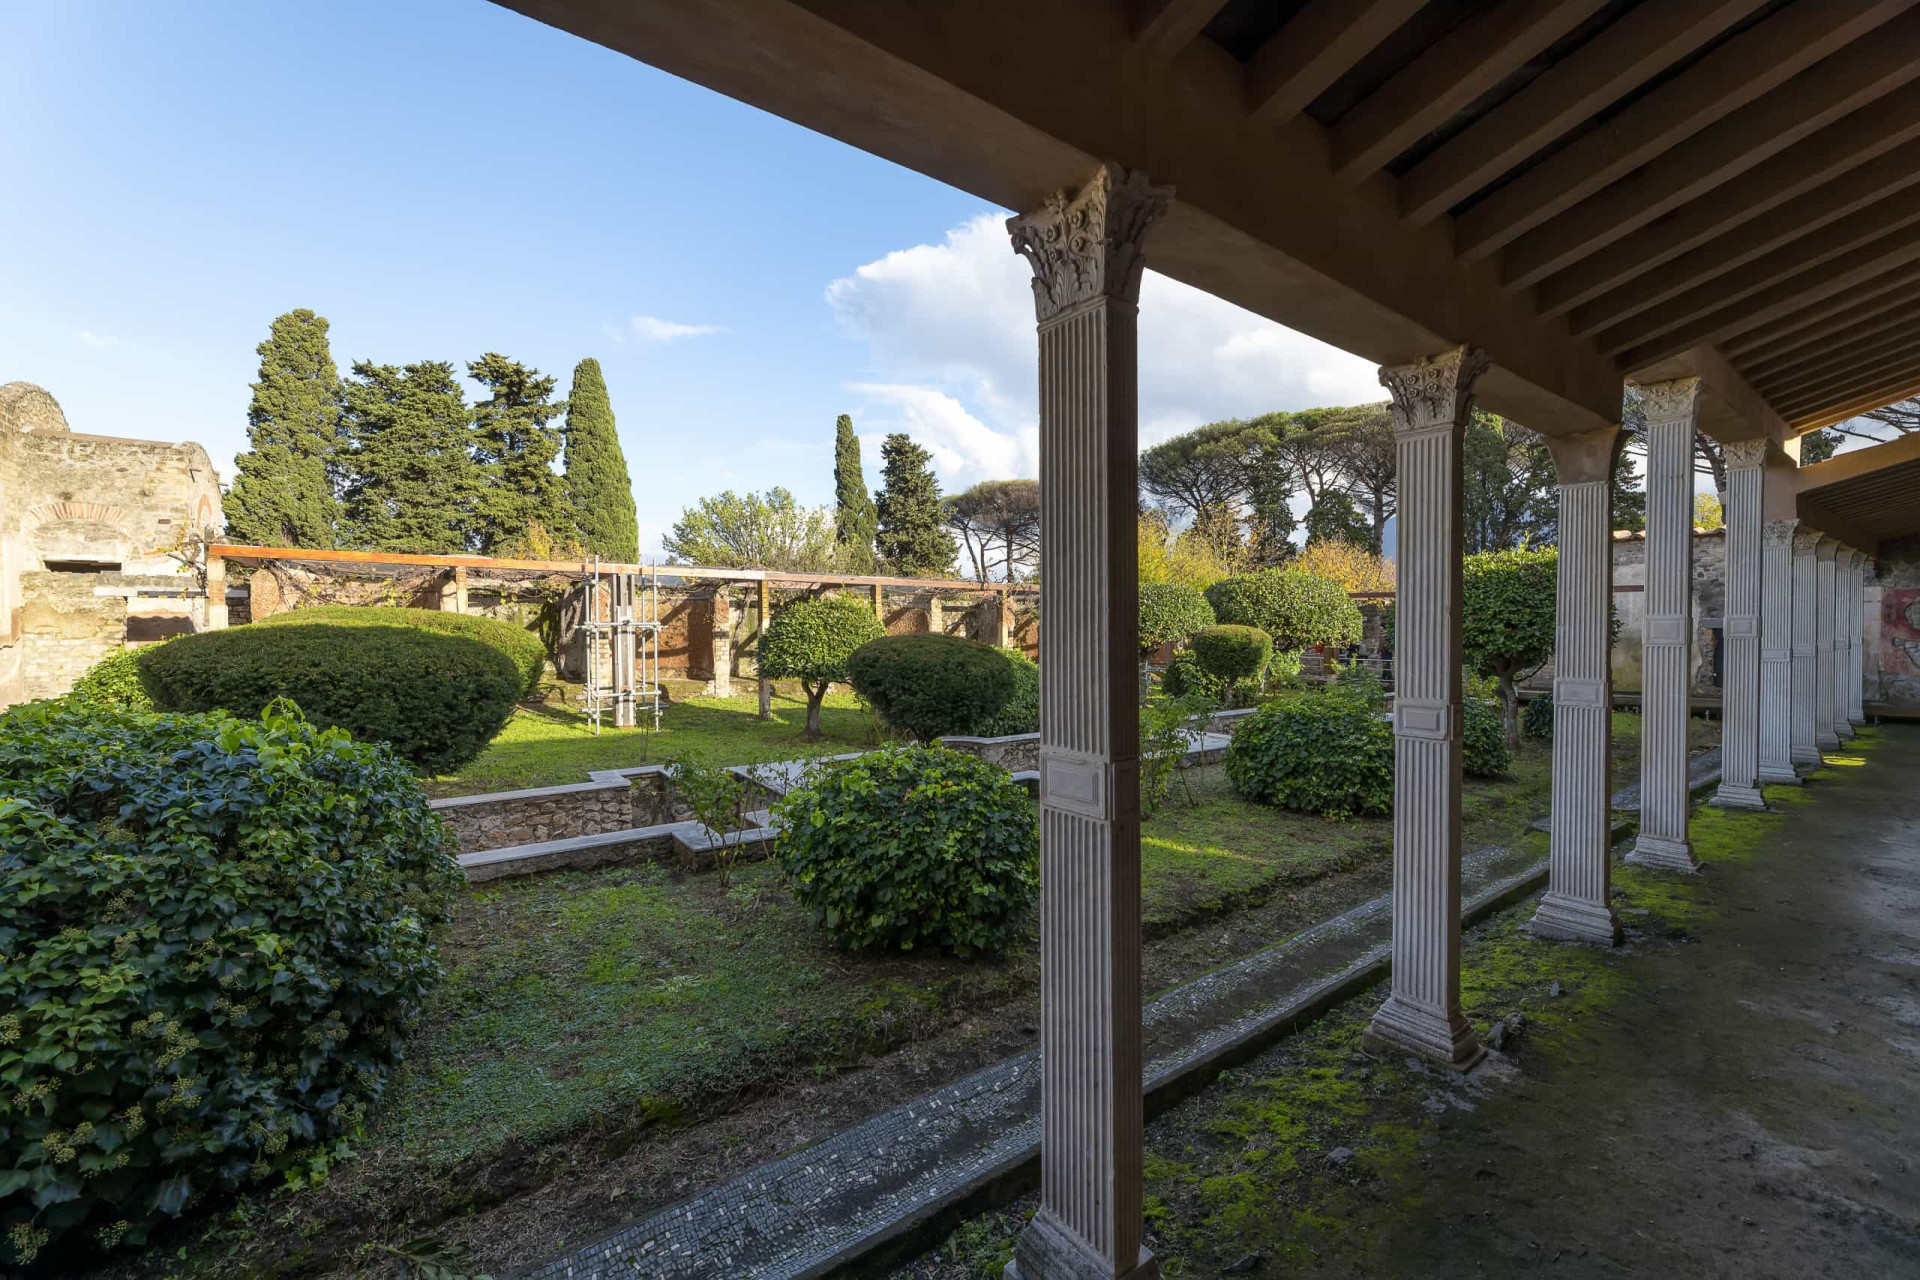 For a city that was once completely buried under volcanic ash, Pompeii is remarkably green! Make sure to have a look around the gardens.<p>You may also like:<a href="https://www.starsinsider.com/n/304652?utm_source=msn.com&utm_medium=display&utm_campaign=referral_description&utm_content=450429v6en-us"> 30 theories about what happens when you die</a></p>